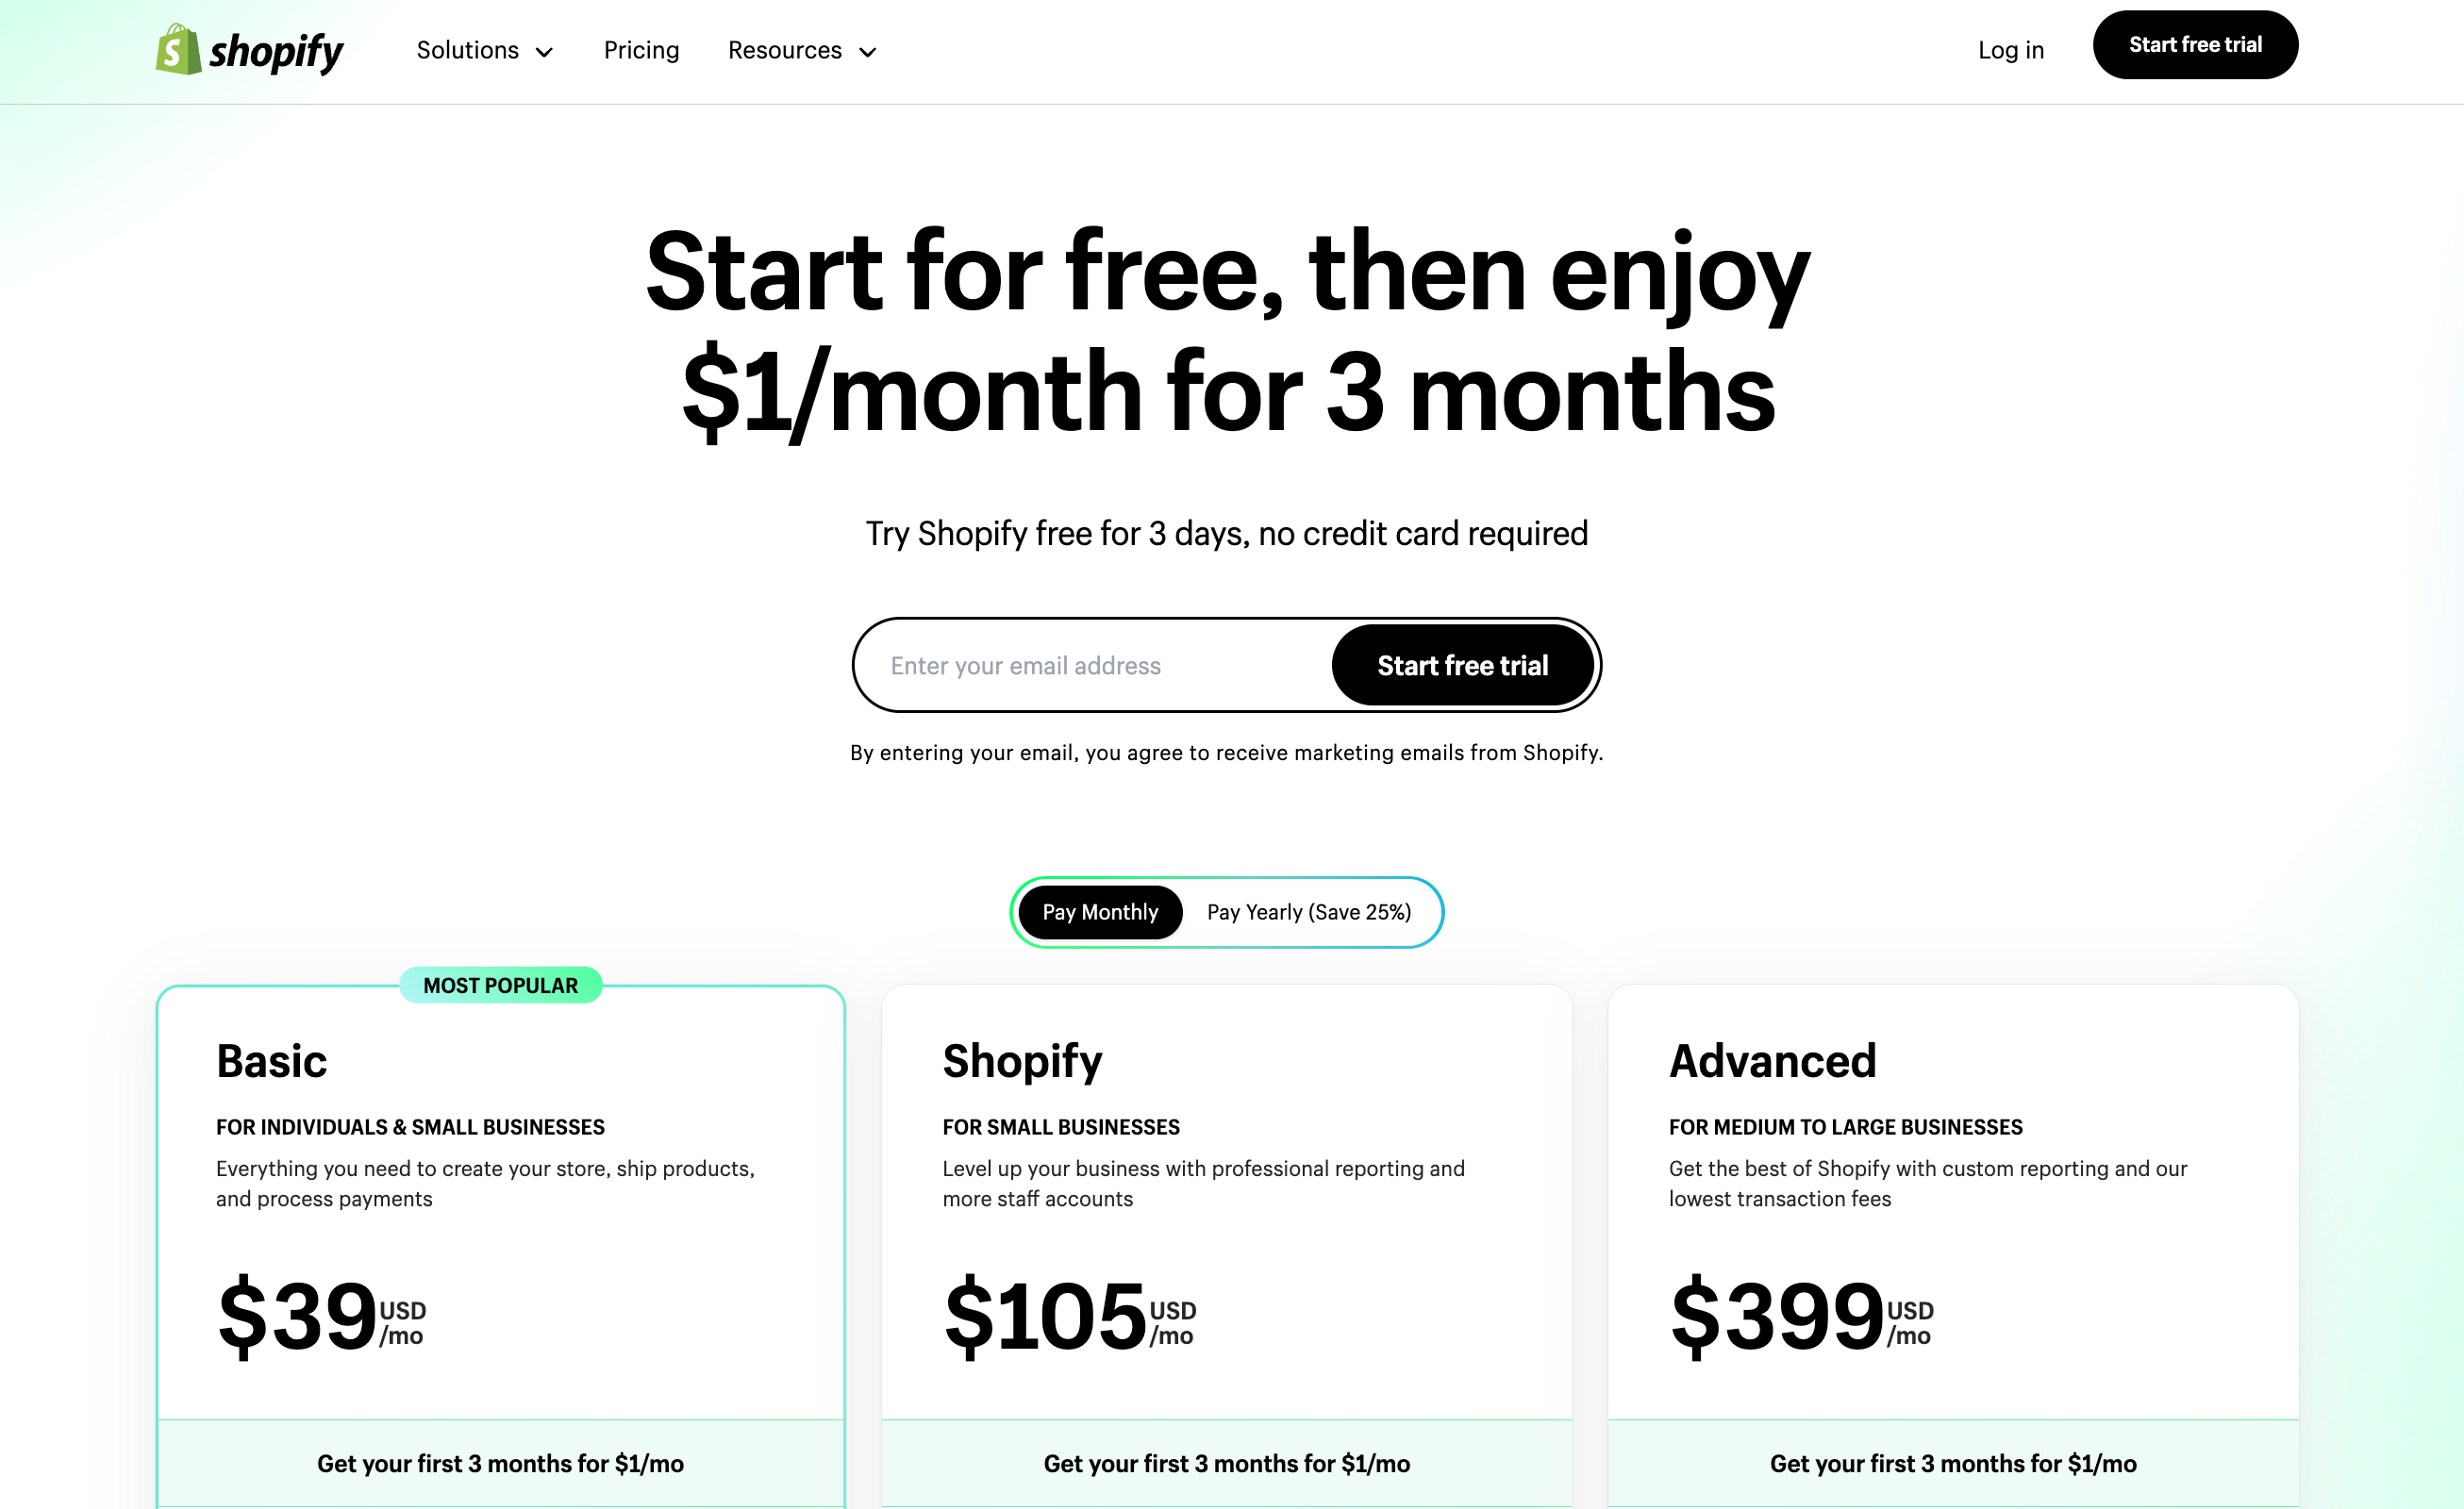 Screen shot of the pricing plans for Shopify